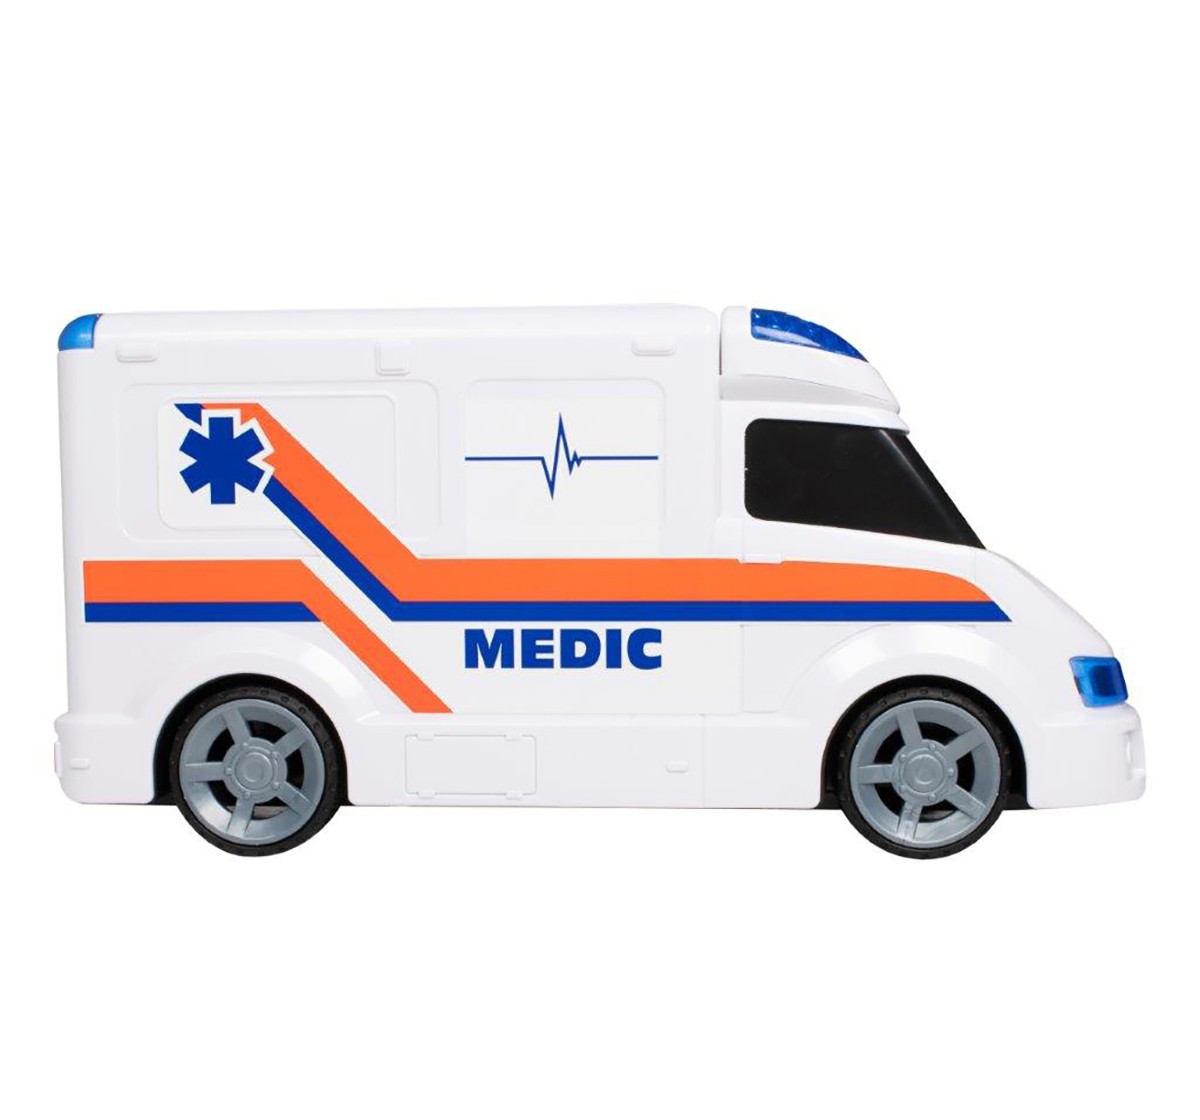 Teamsterz Light And Sound Ambulance Vehicles for Kids age 3Y+ 